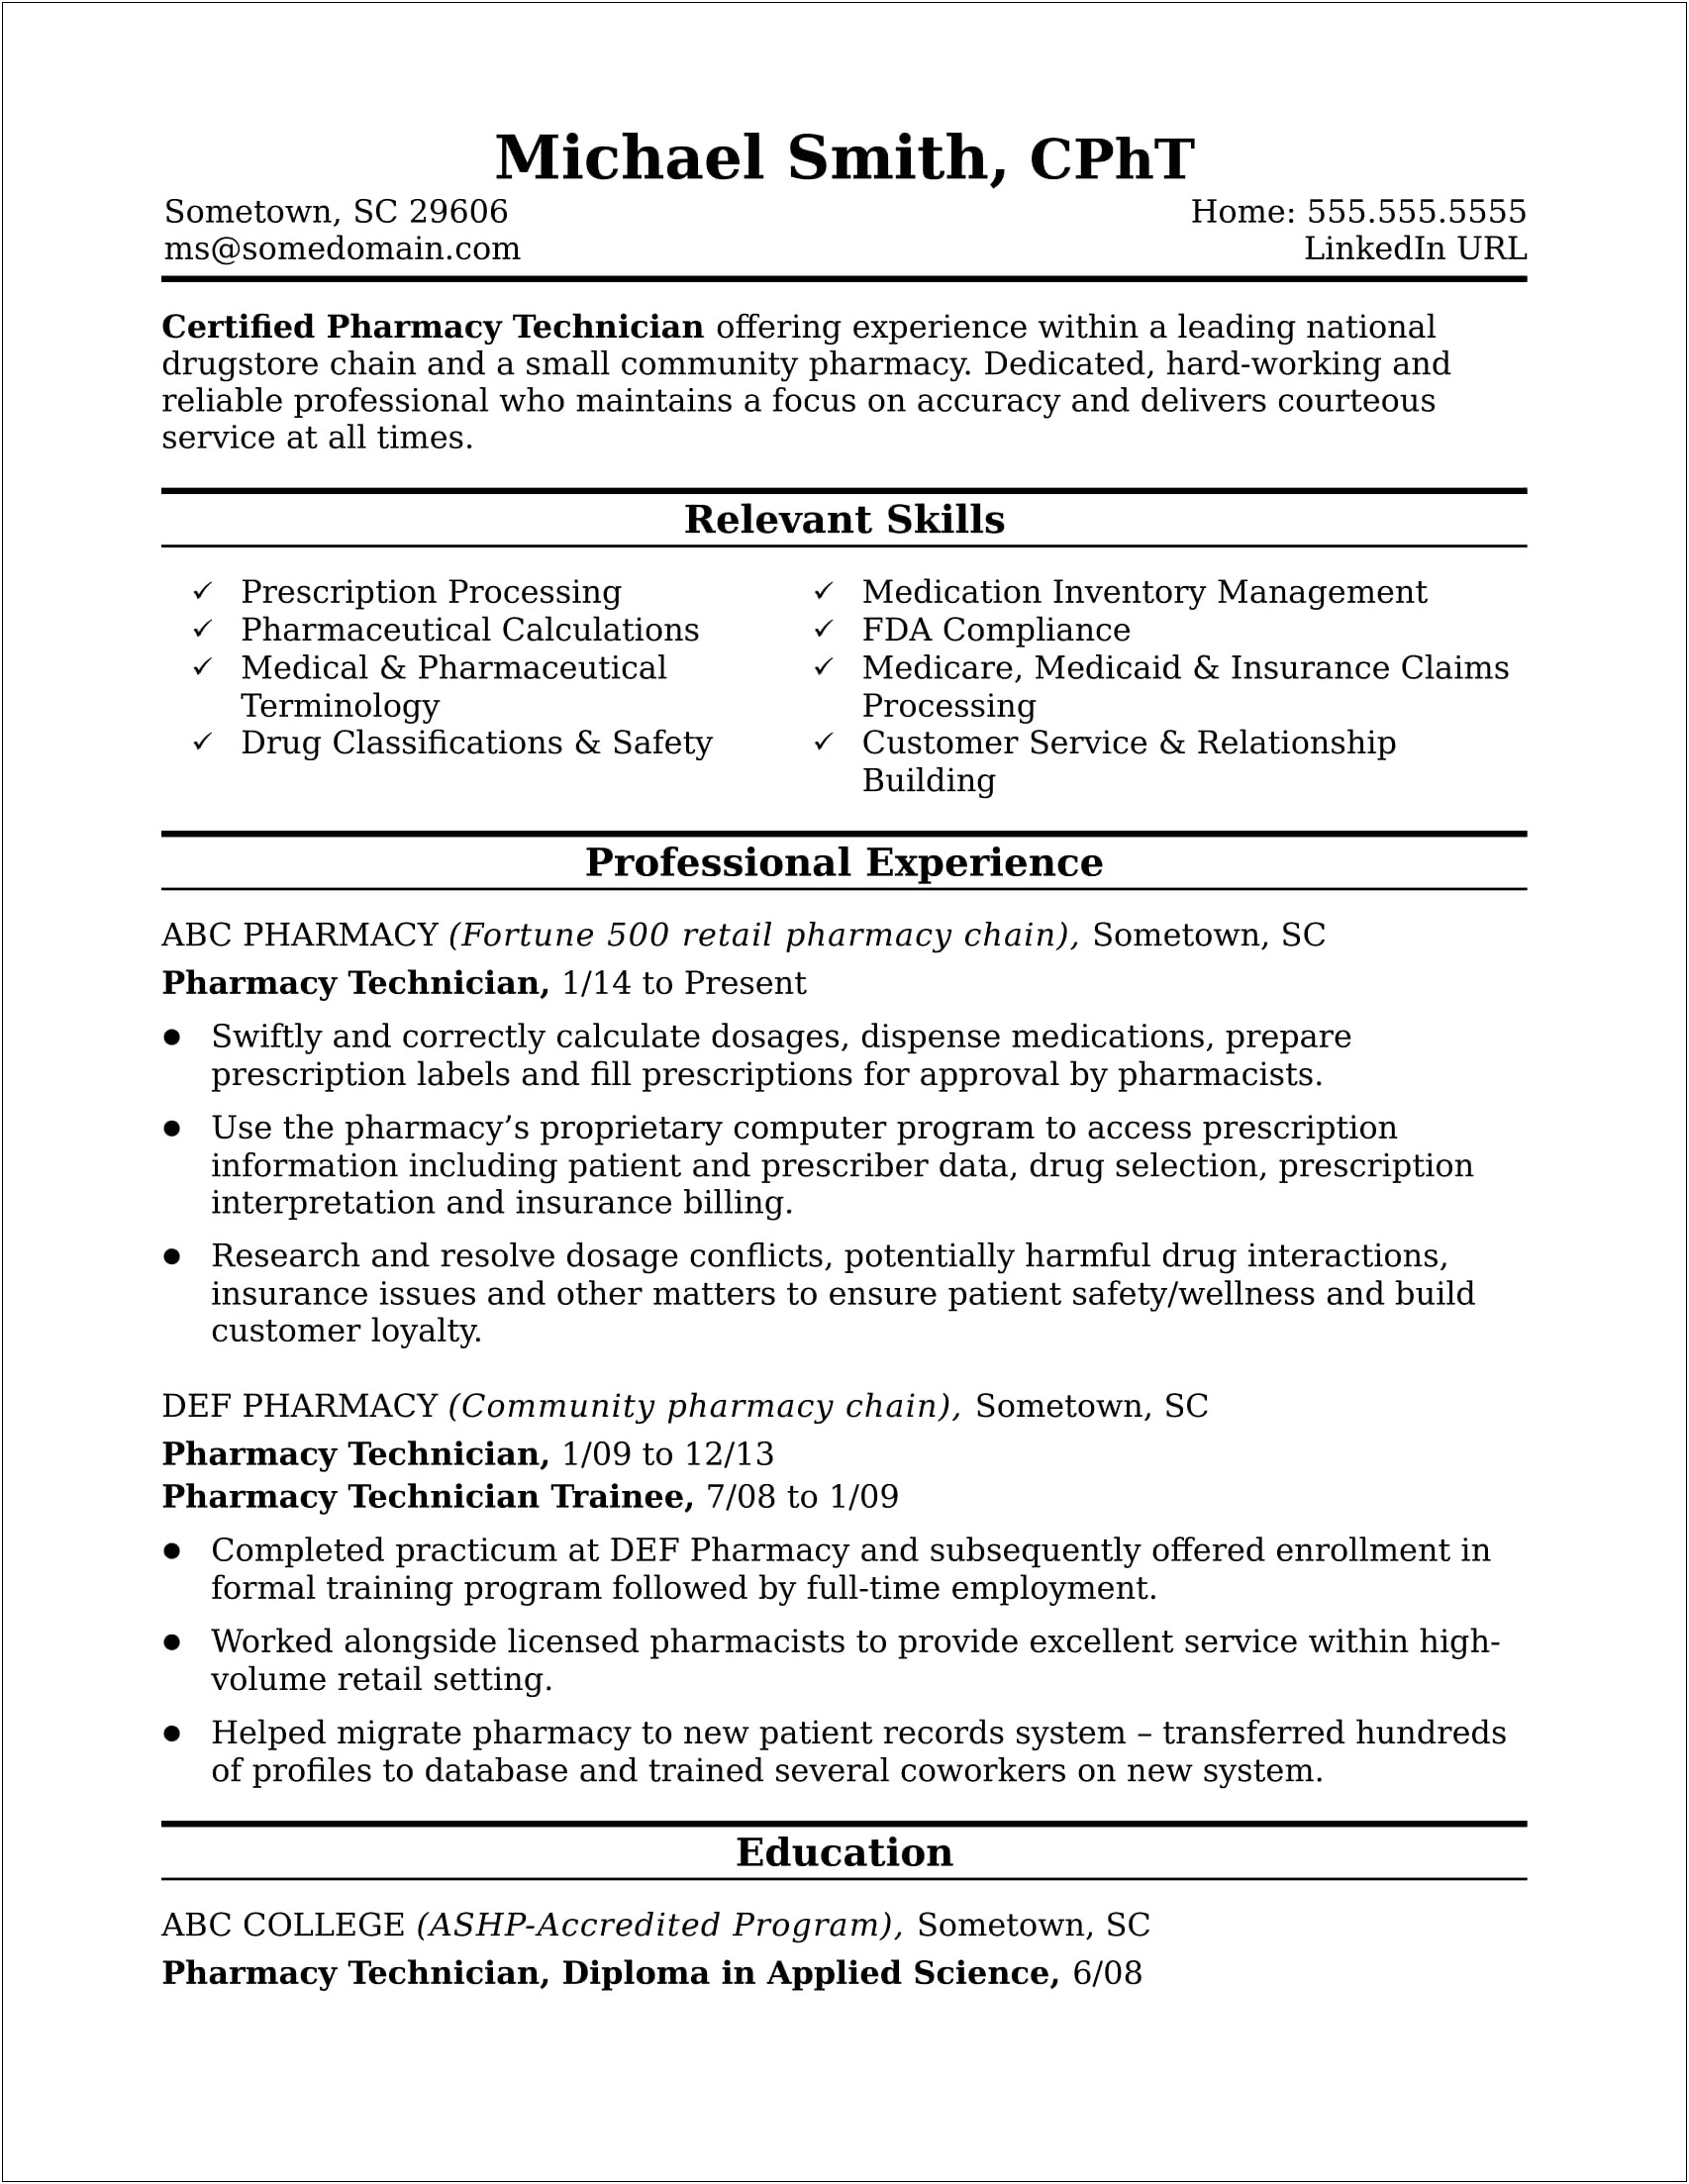 Job Skills Required By A Pharmacist For Resume